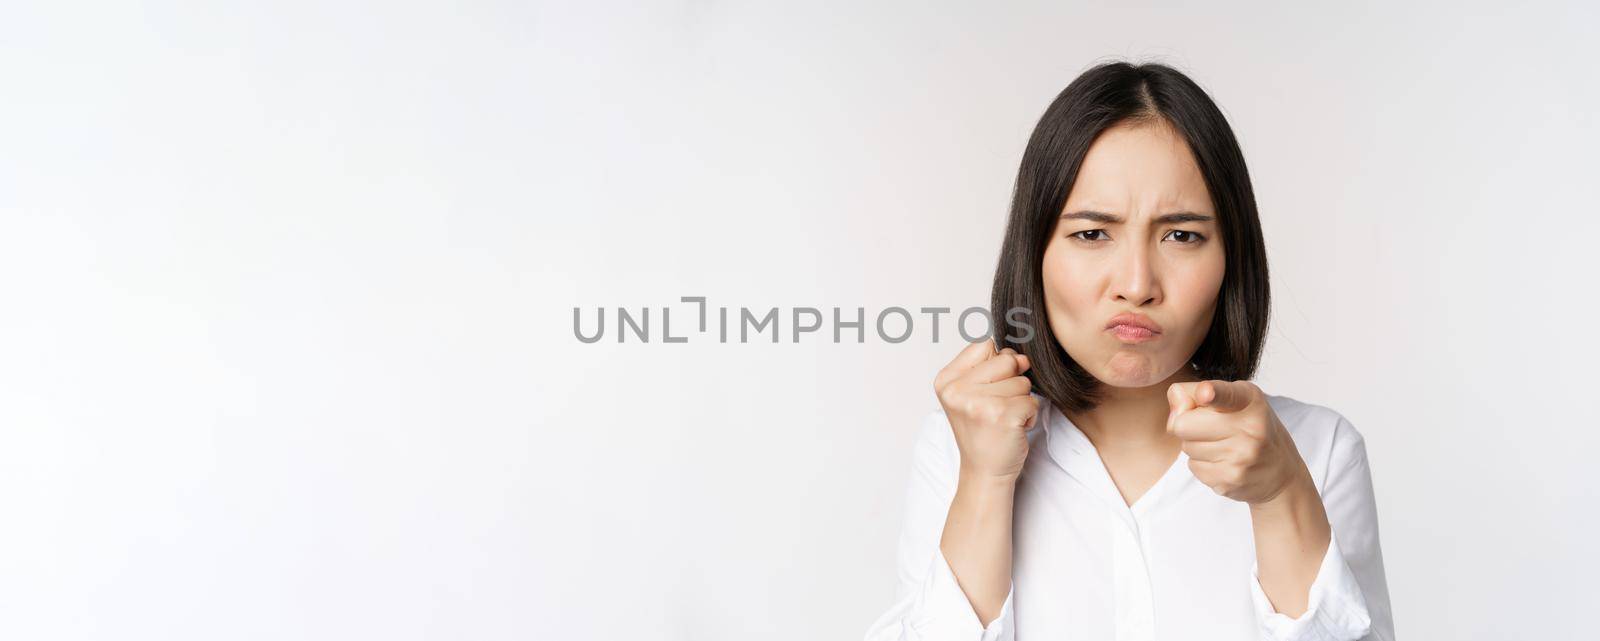 Close up of angry young woman clench fists, ready for fight, fighting, standing over white background.